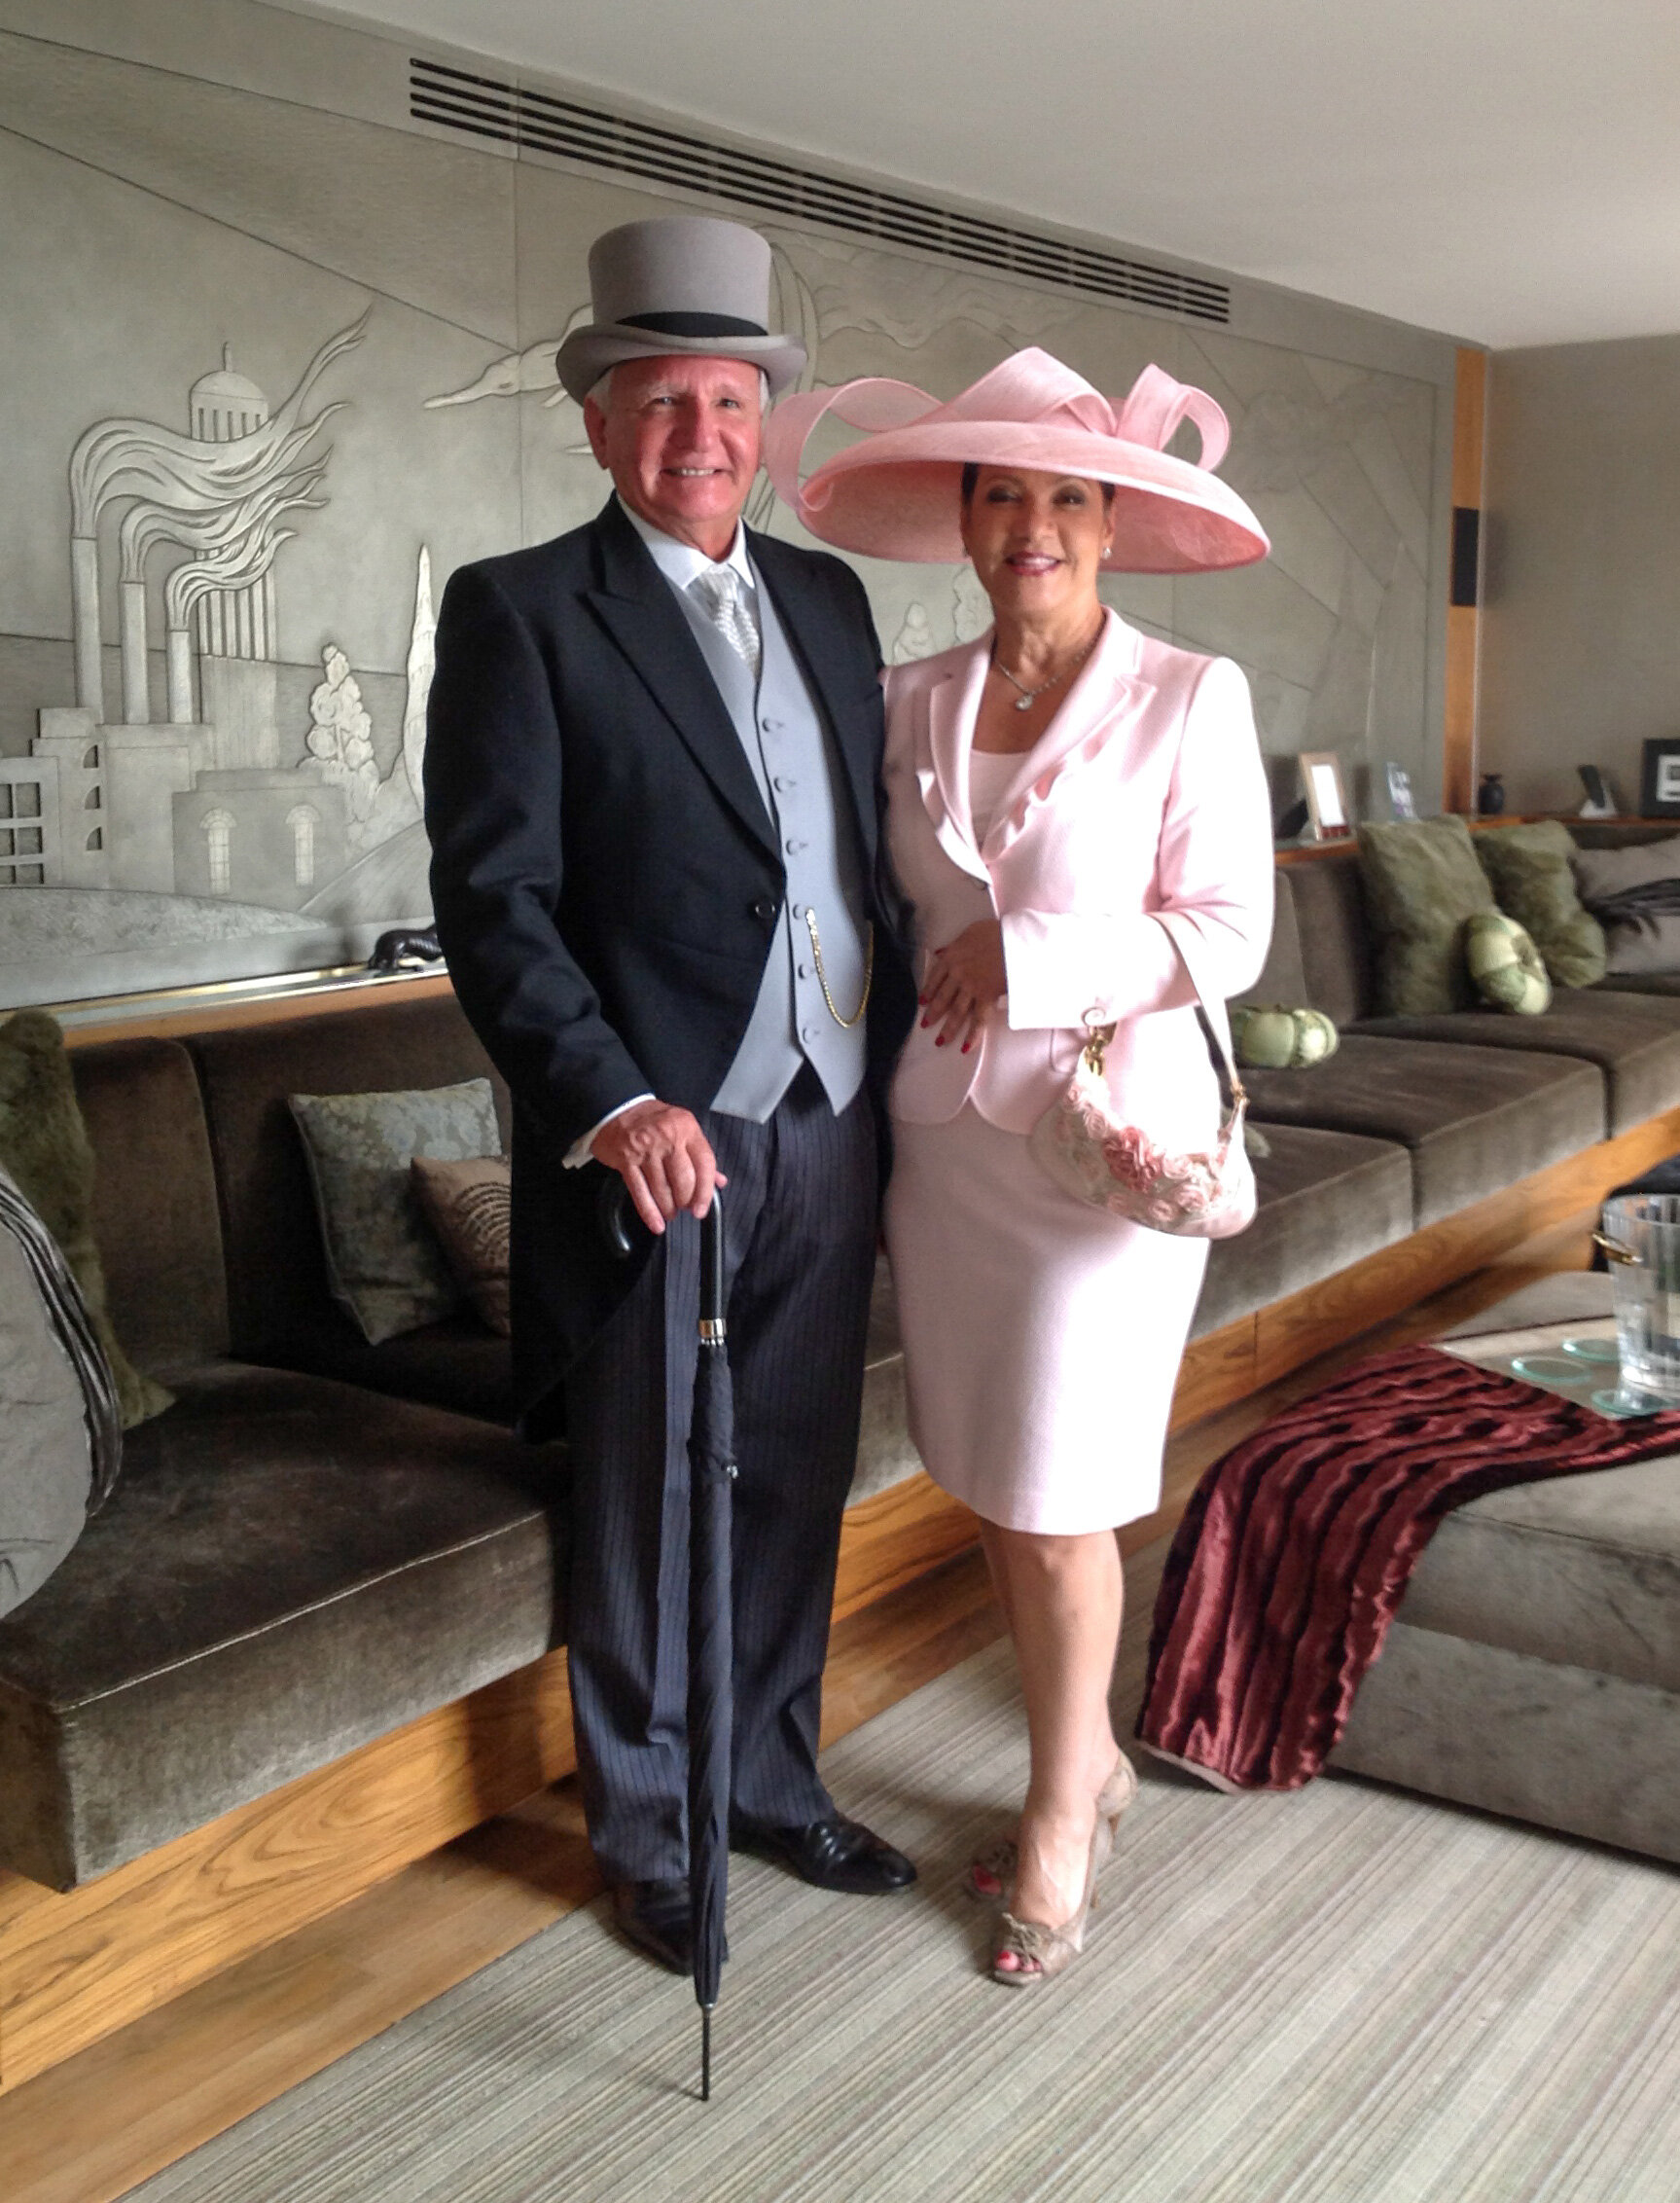  Michelle and I at Royal Ascot 2013 with the Queen in attendance. 